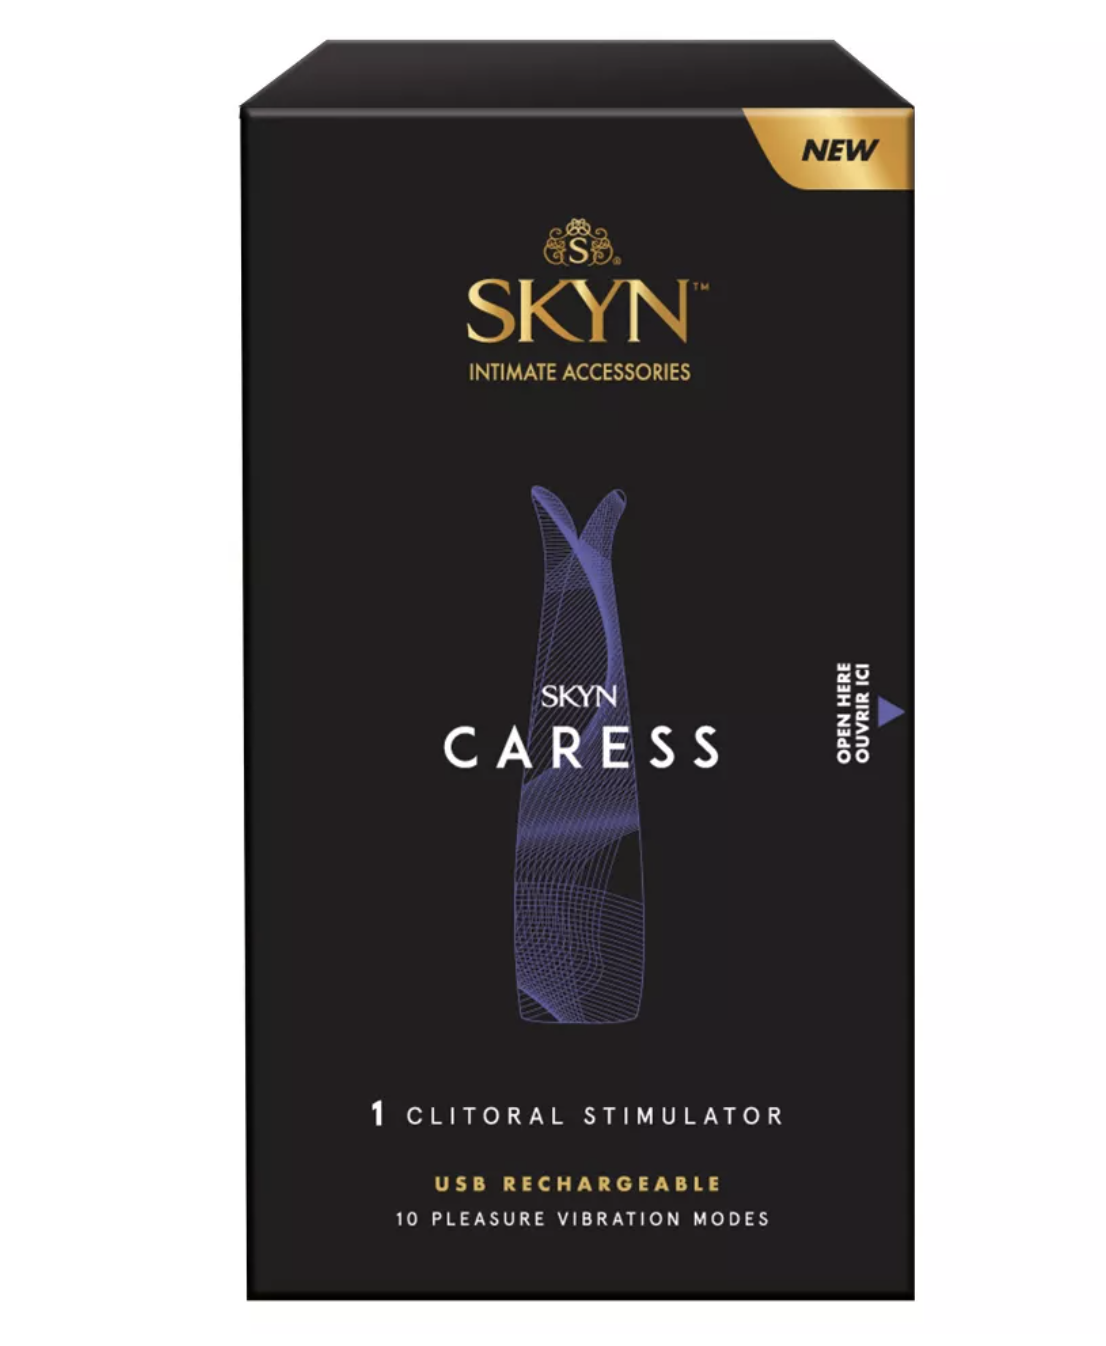 Product image of Skyn Caress clitoral stimulator